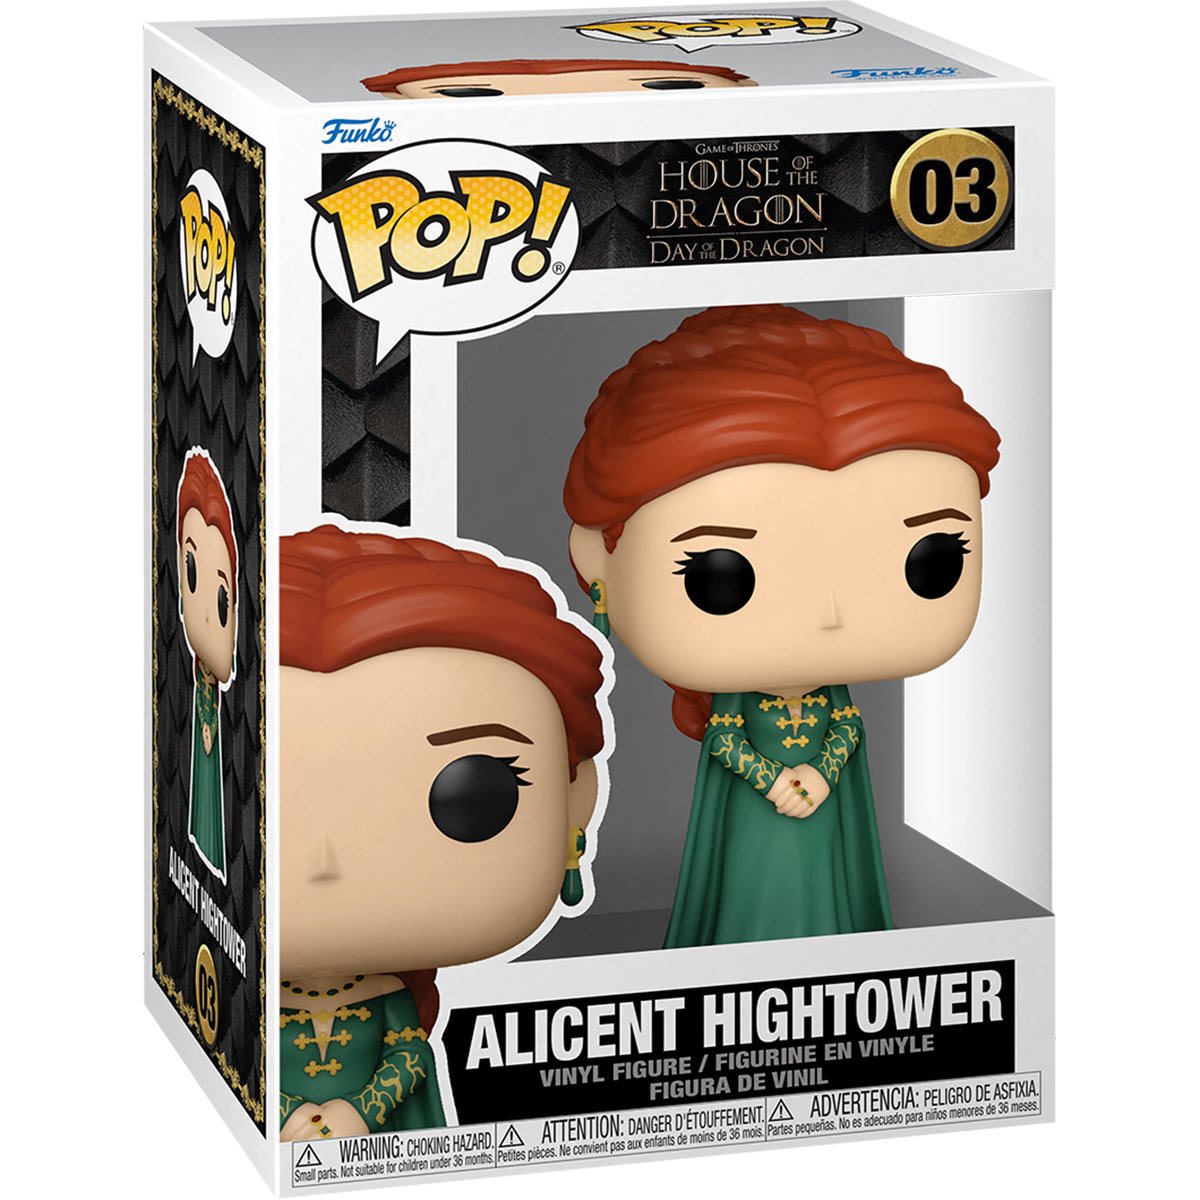 Funko Pop TV: Game of Thrones House of Dragon - Alicent Hightower